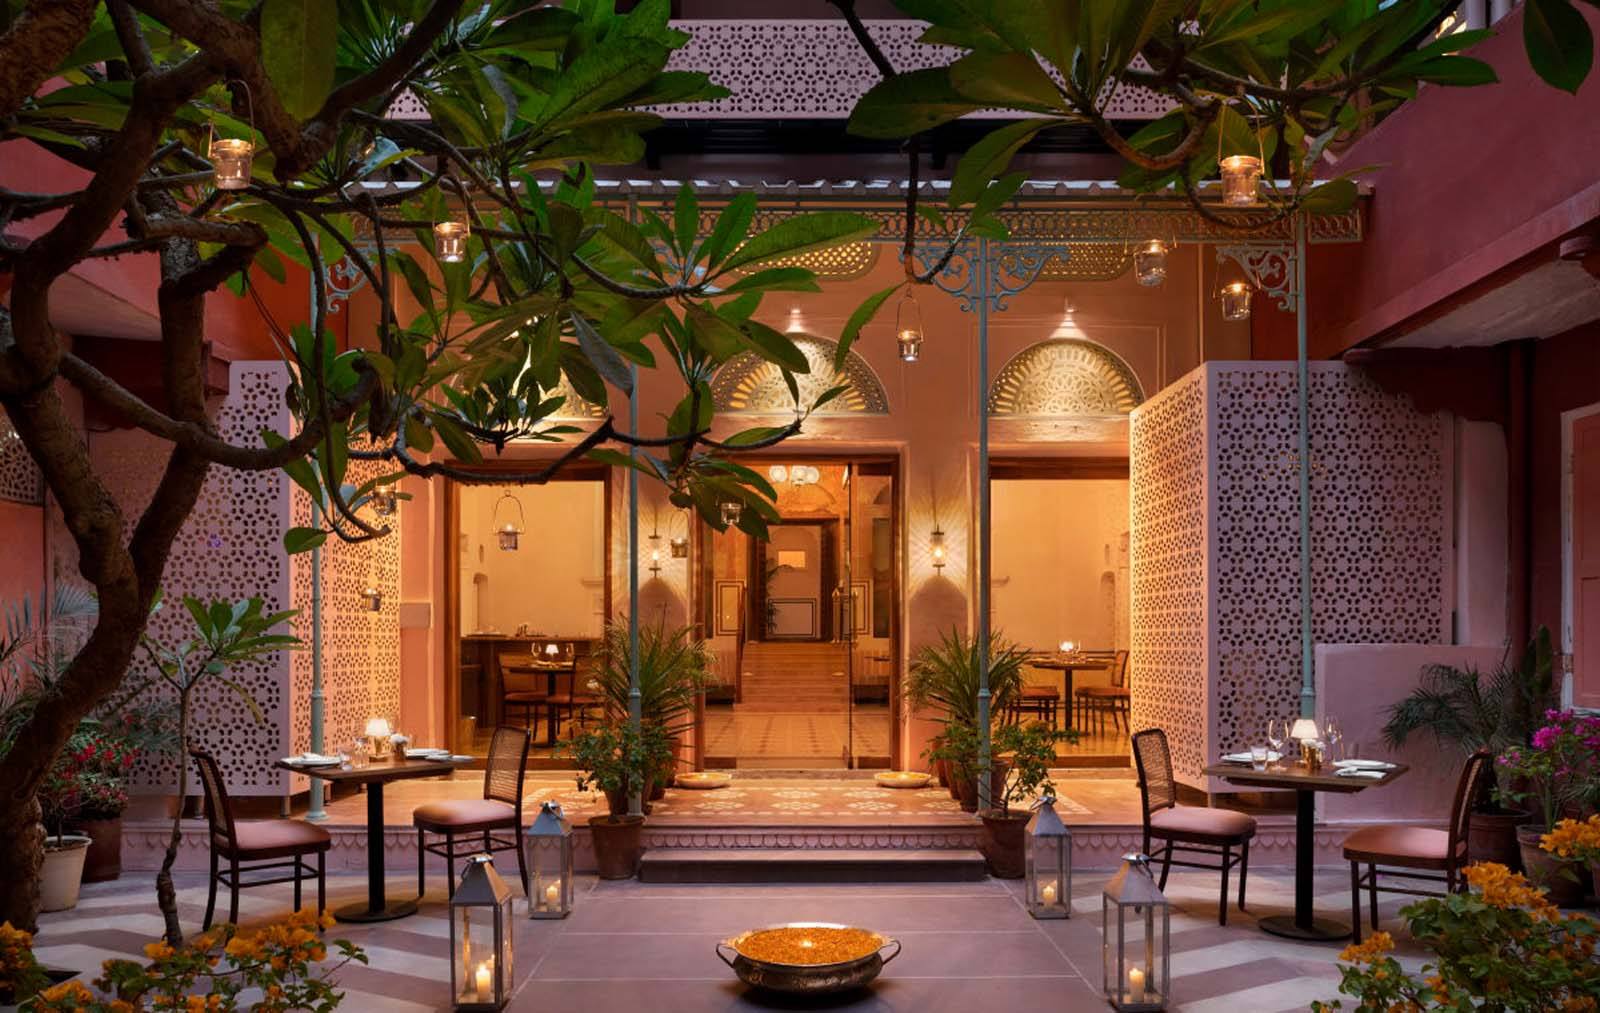 Outer courtyard facing restaurant at the johri hotel